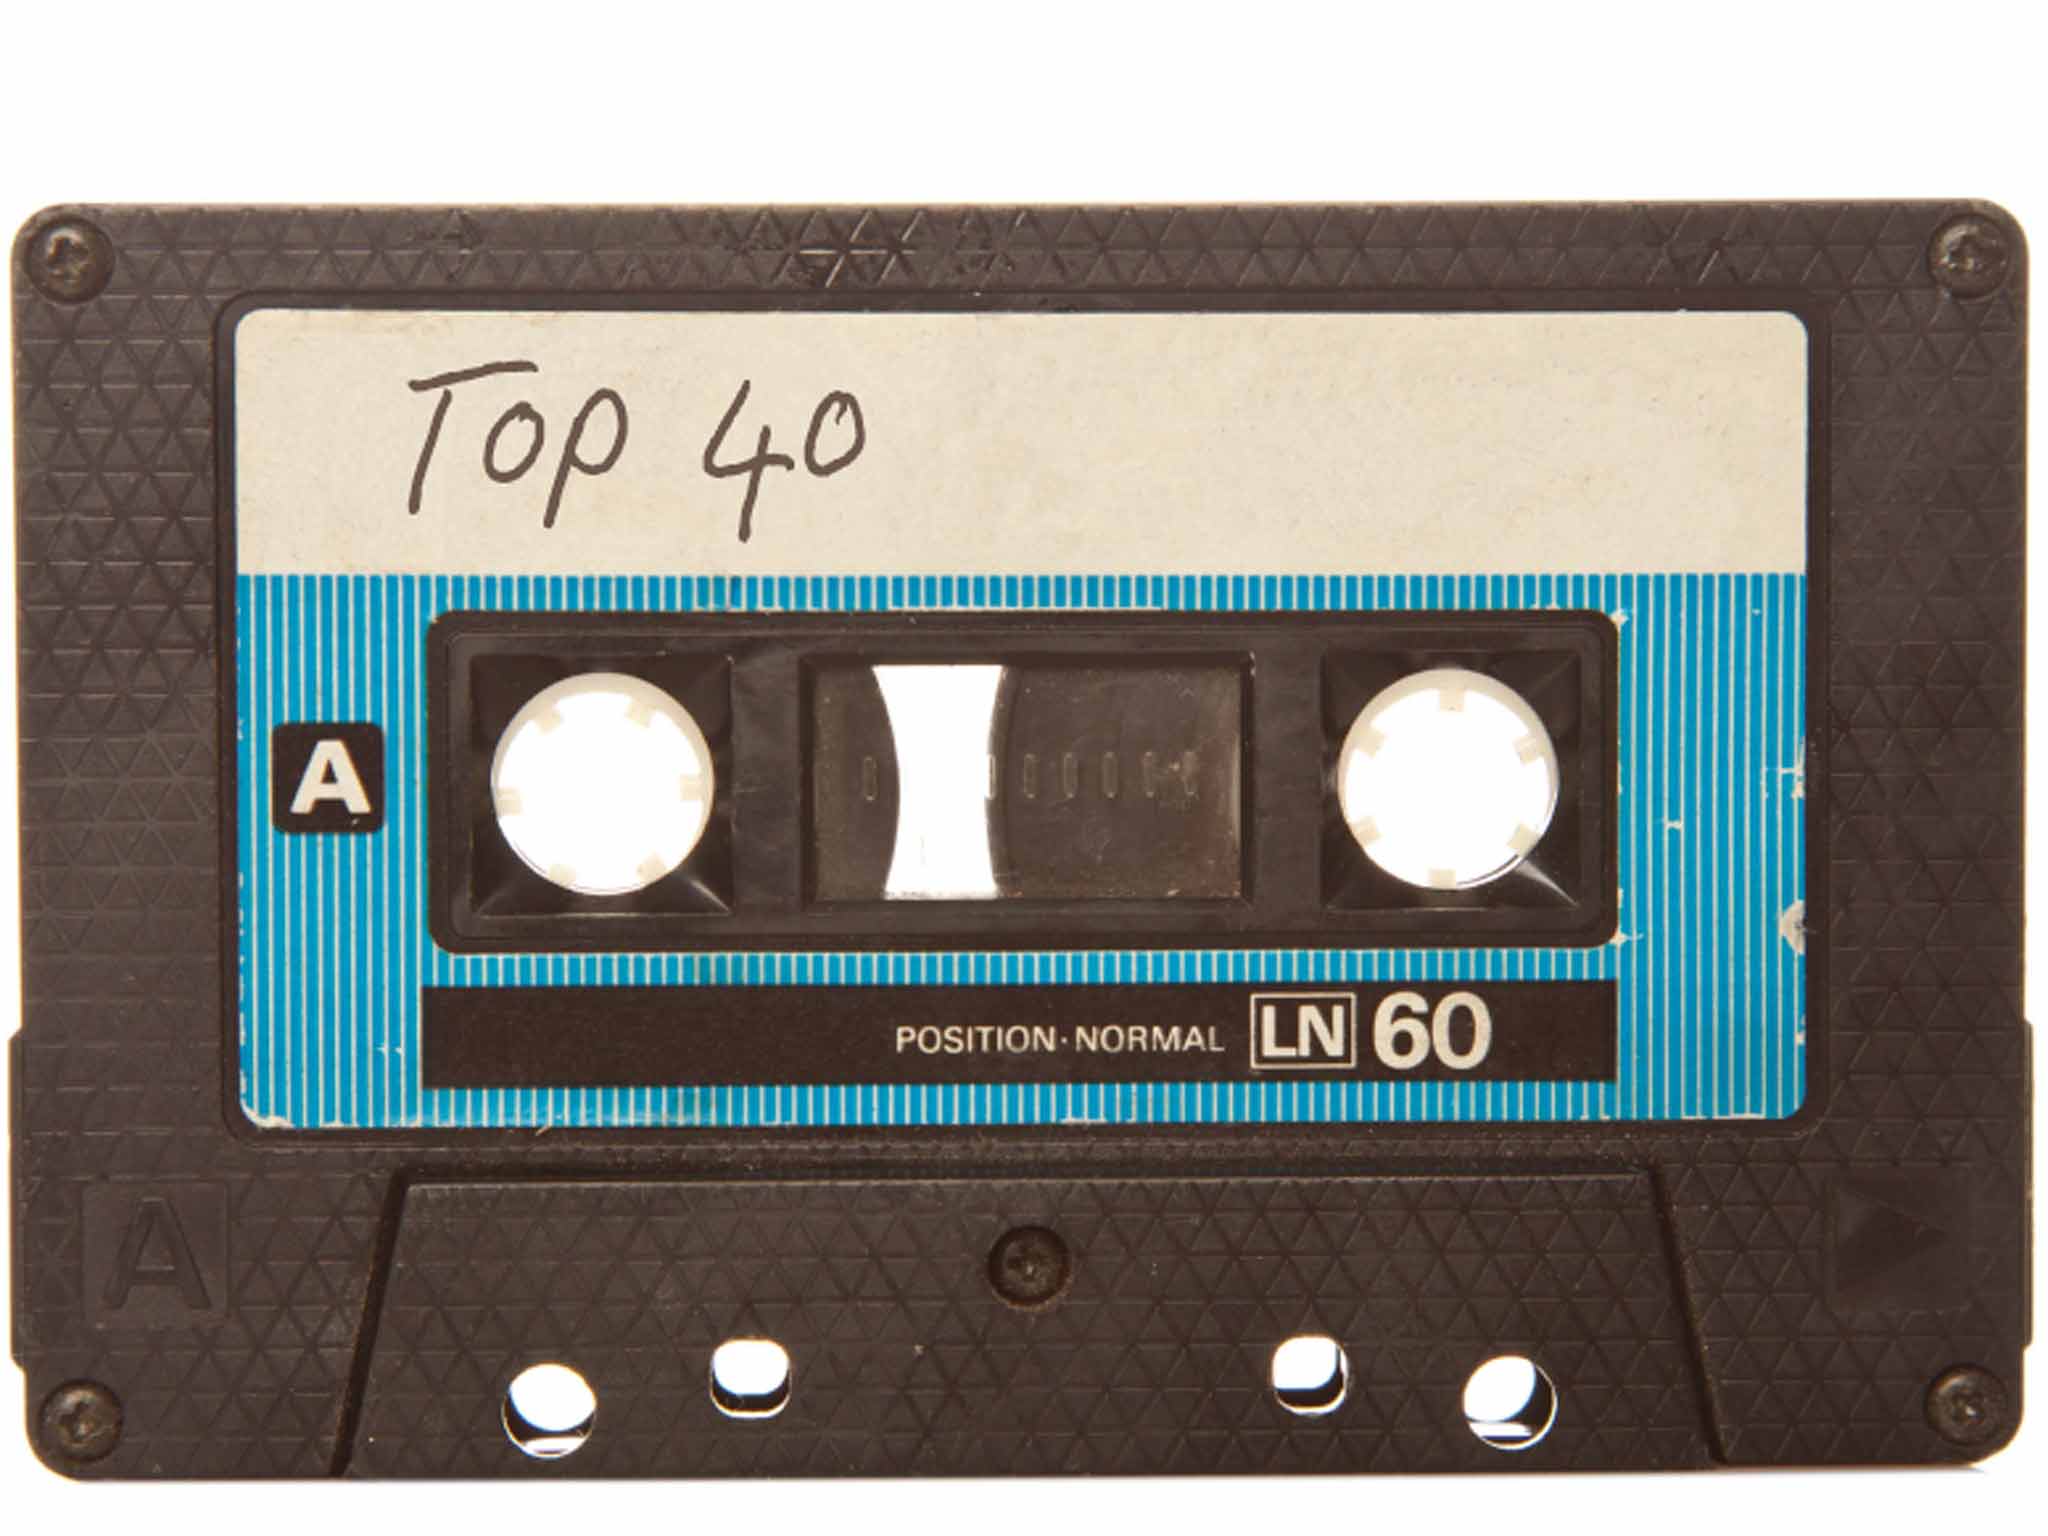 Image result for taping the top 40